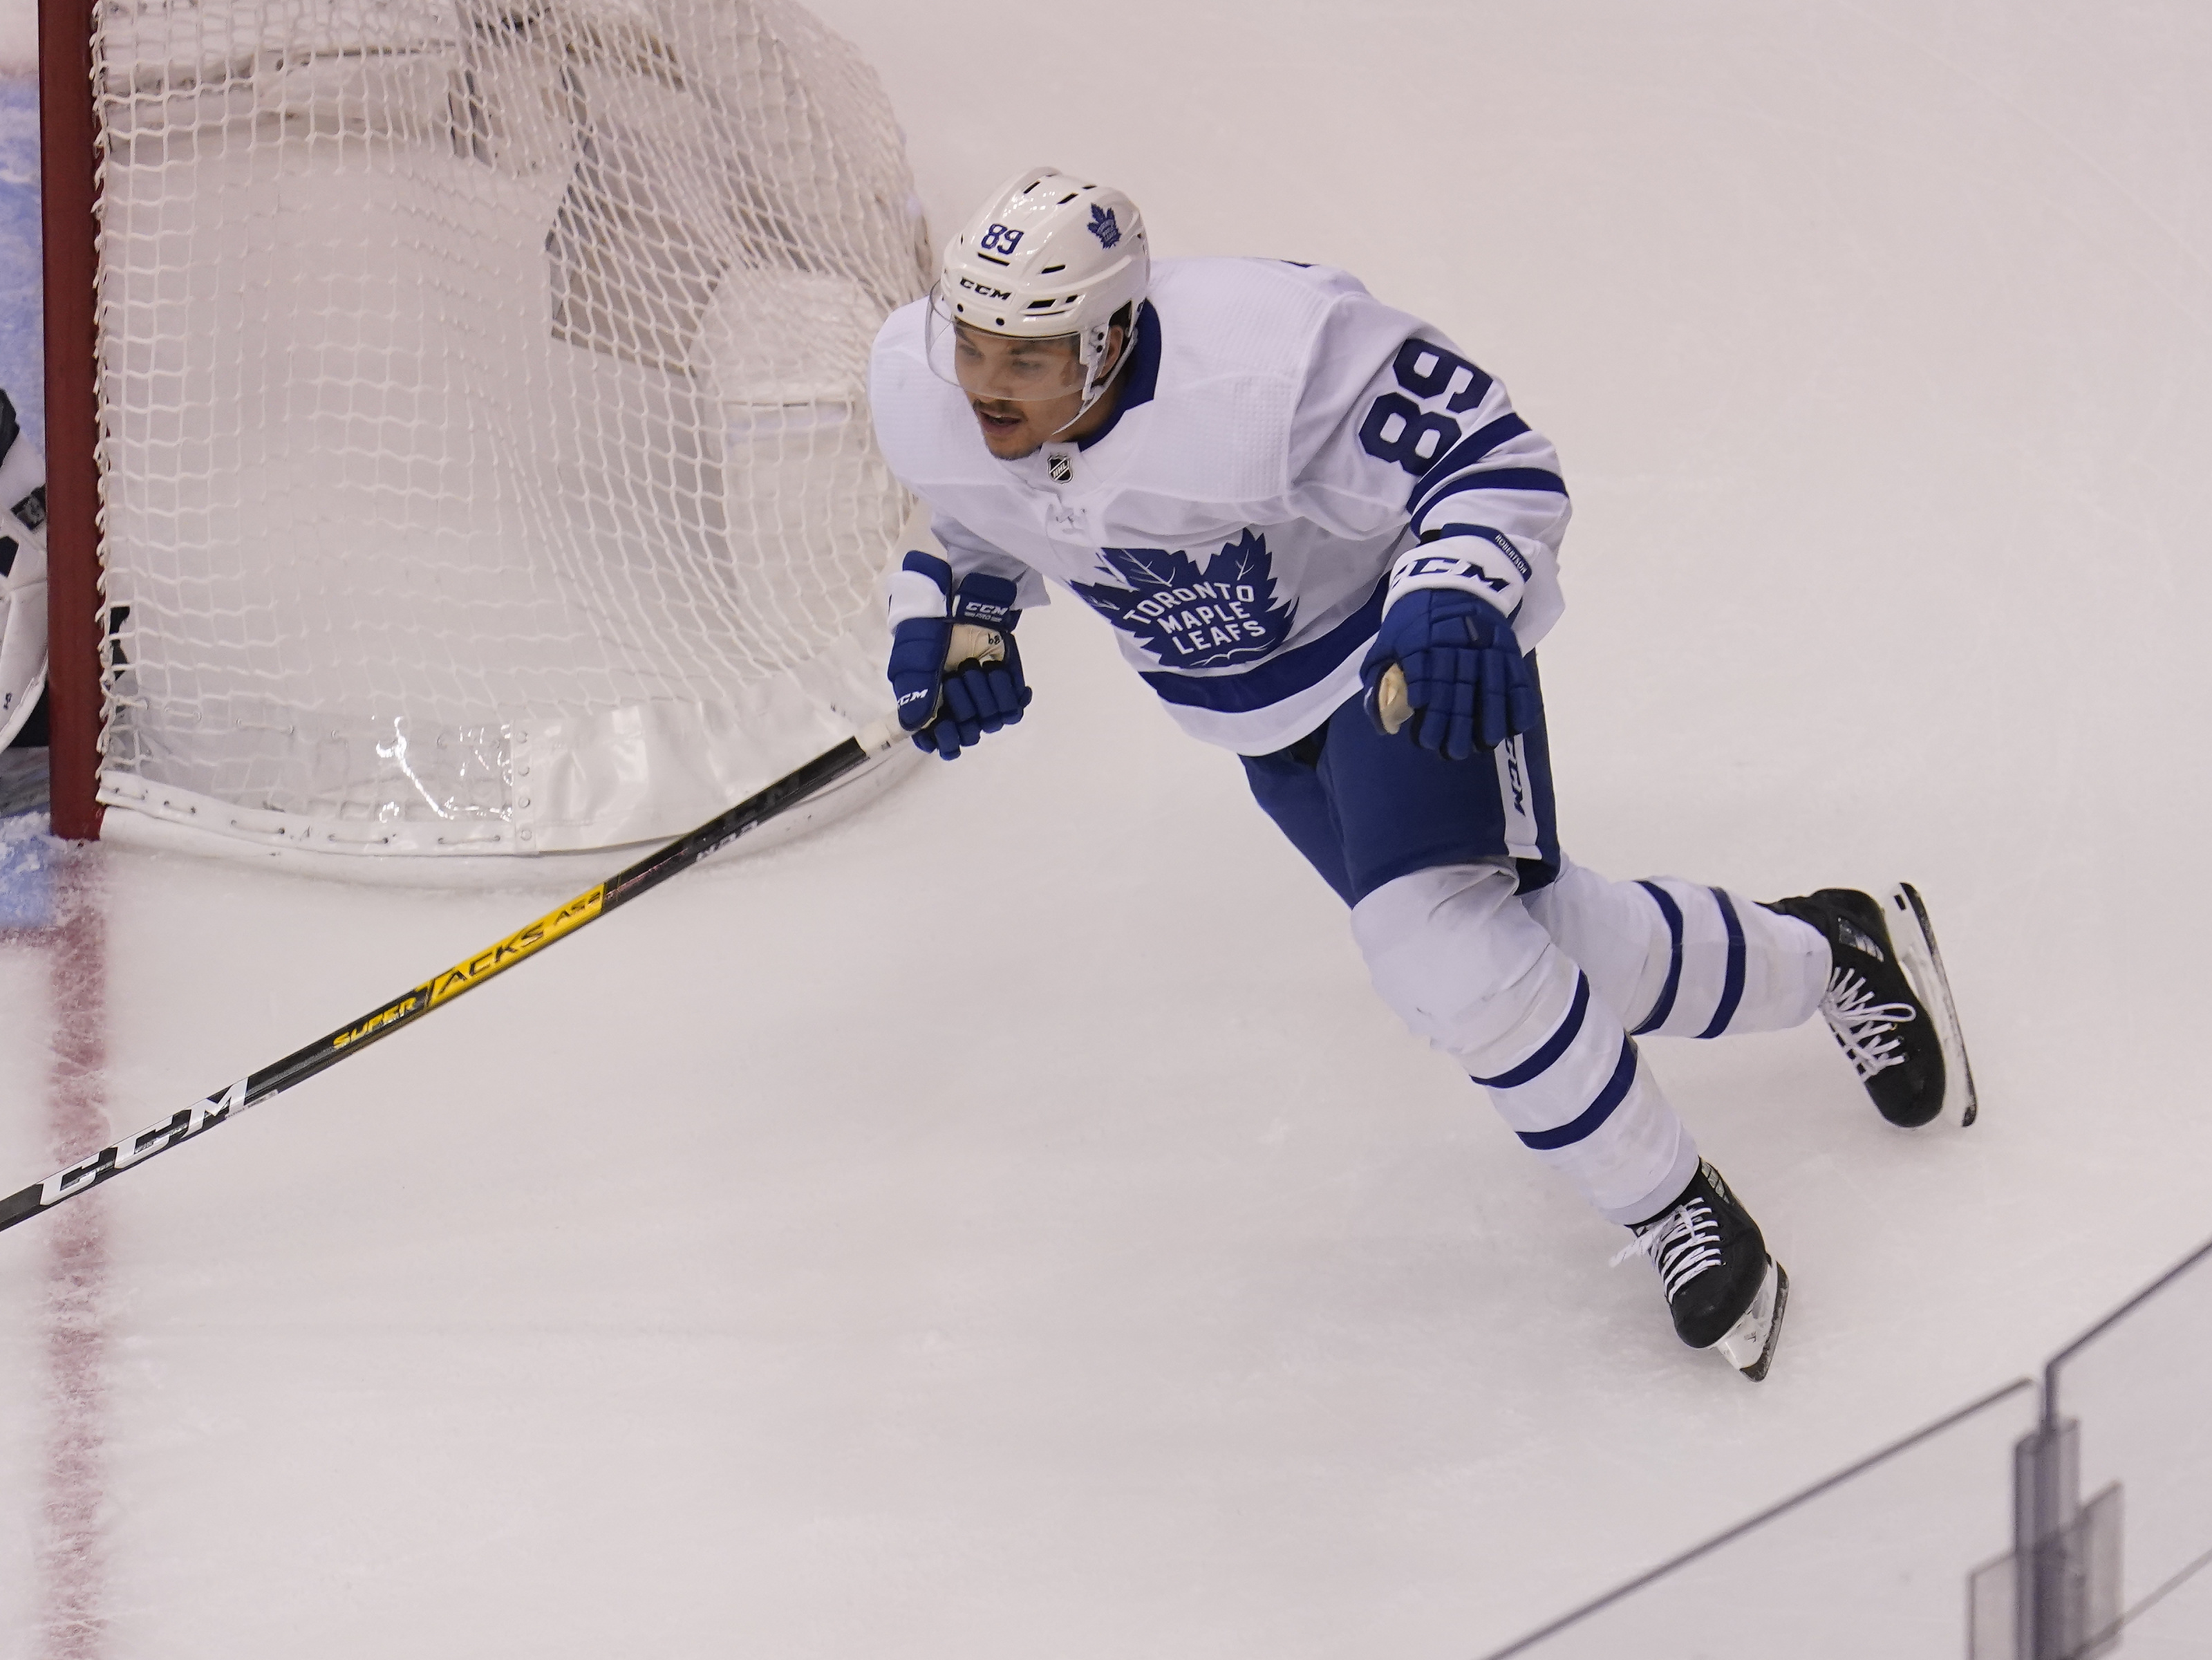 Toronto Maple Leafs: Jack Campbell continues to impress